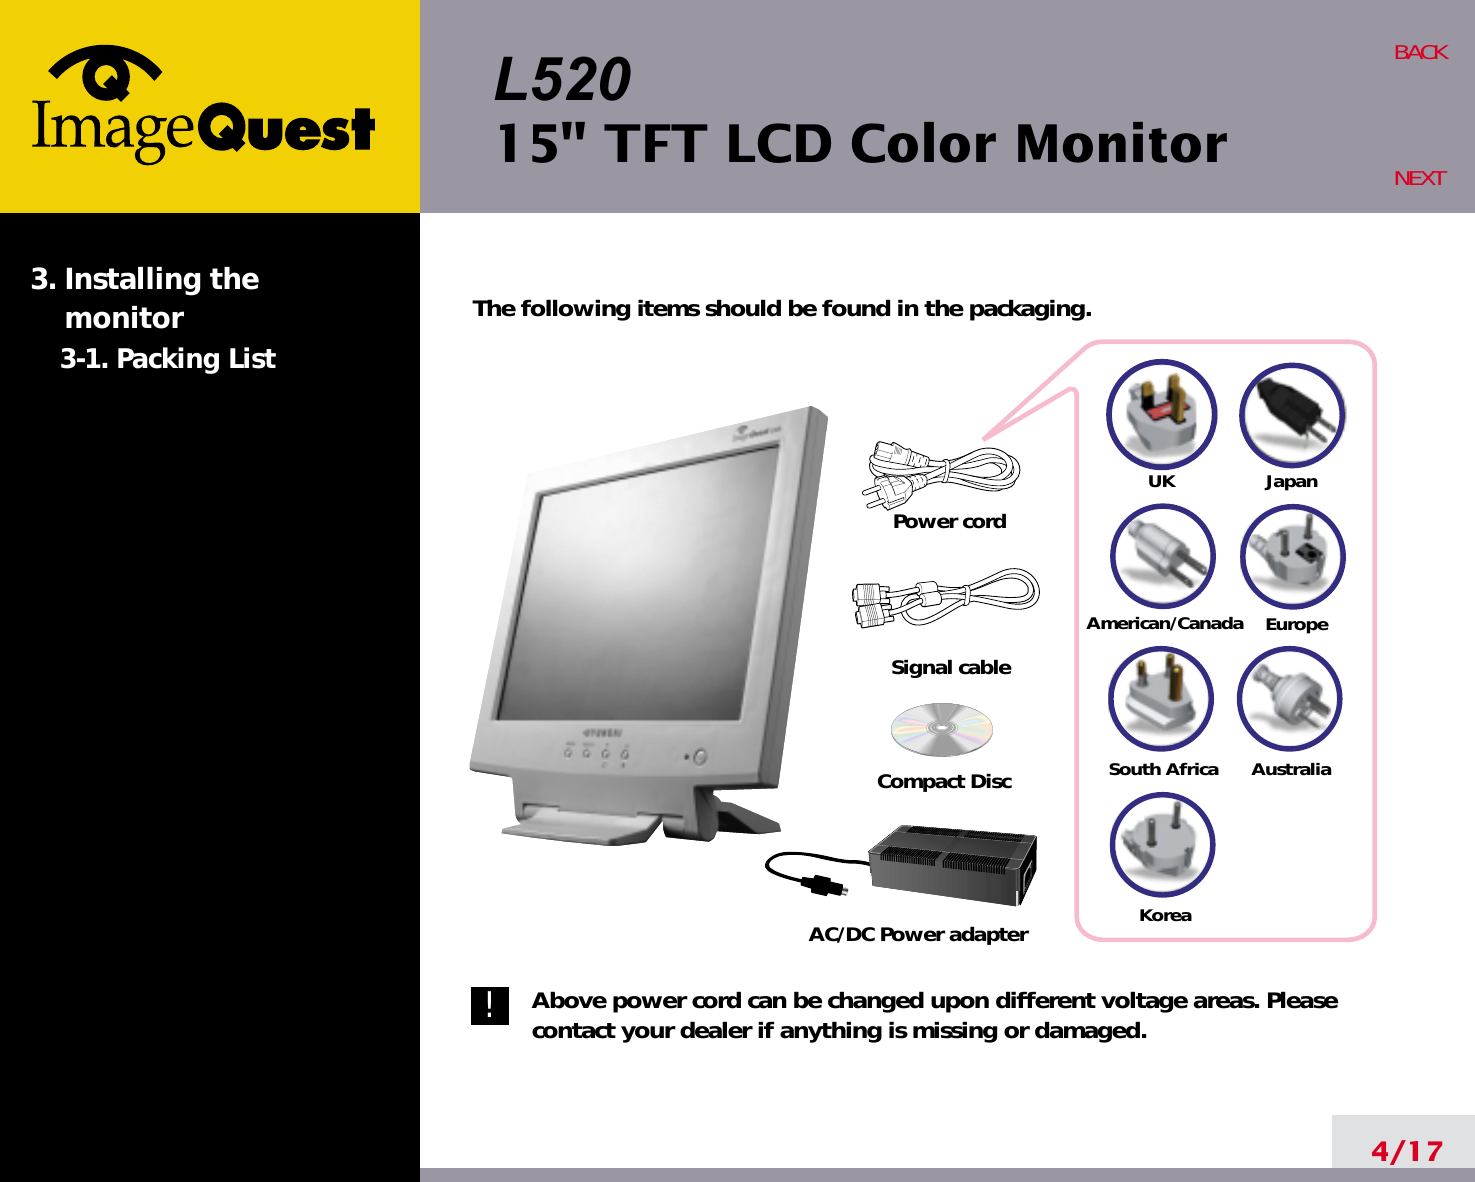 L52015&quot; TFT LCD Color Monitor4/17BACKNEXTThe following items should be found in the packaging.Above power cord can be changed upon different voltage areas. Pleasecontact your dealer if anything is missing or damaged.3. Installing the monitor3-1. Packing List!UKAmerican/CanadaJapanAustraliaKoreaEuropeSouth AfricaPower cordSignal cableAC/DC Power adapterCompact Disc